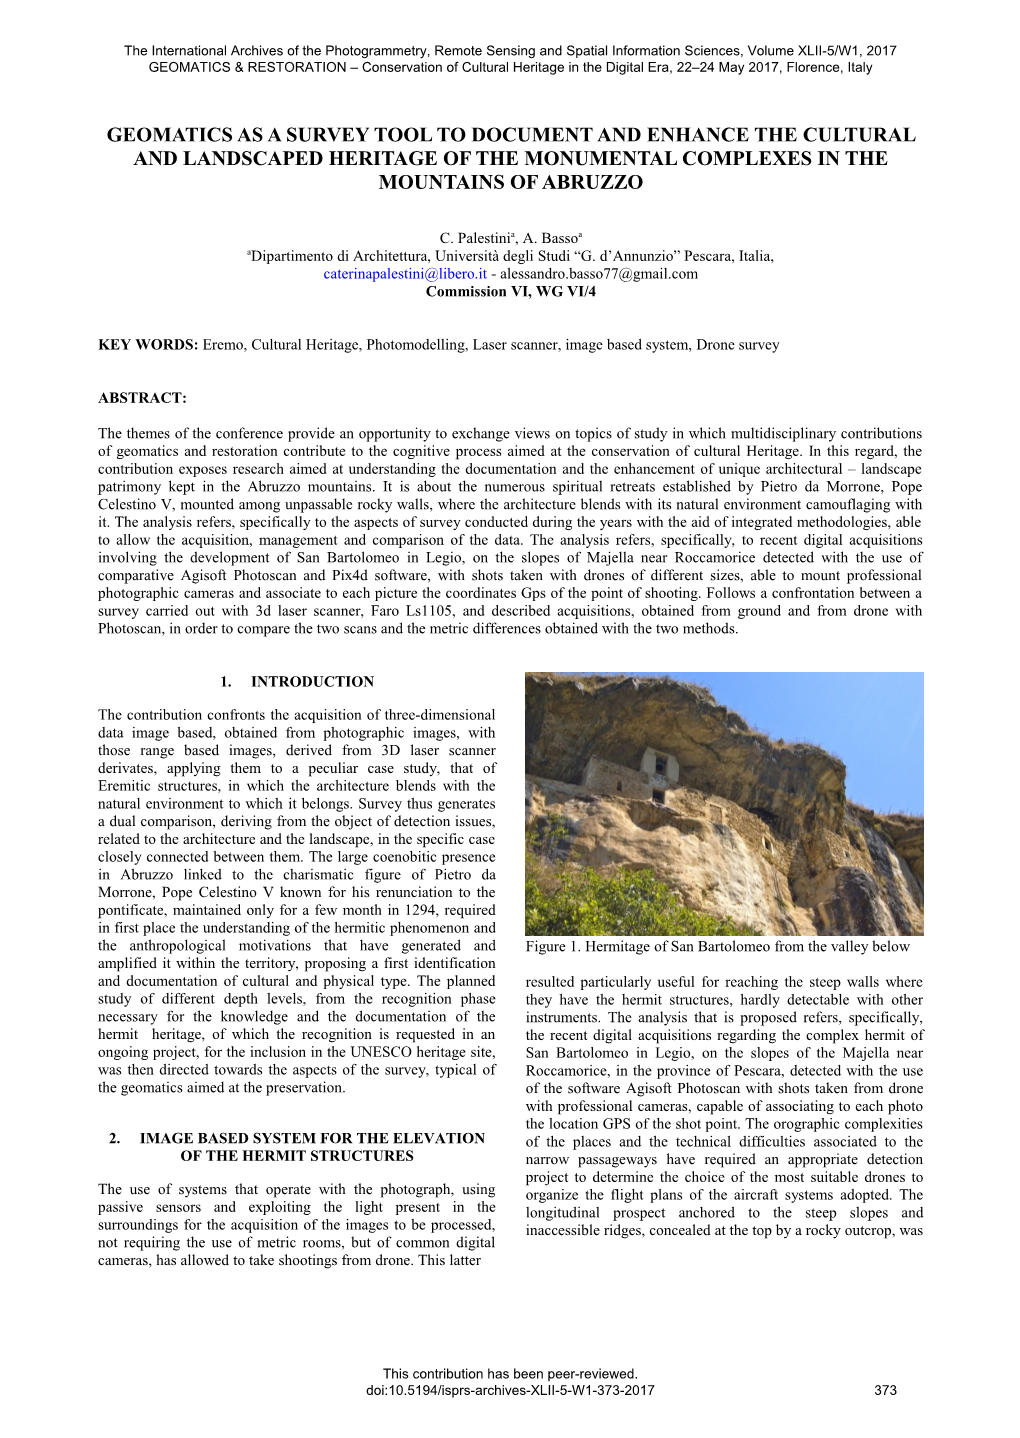 Geomatics As a Survey Tool to Document and Enhance the Cultural and Landscaped Heritage of the Monumental Complexes in the Mountains of Abruzzo